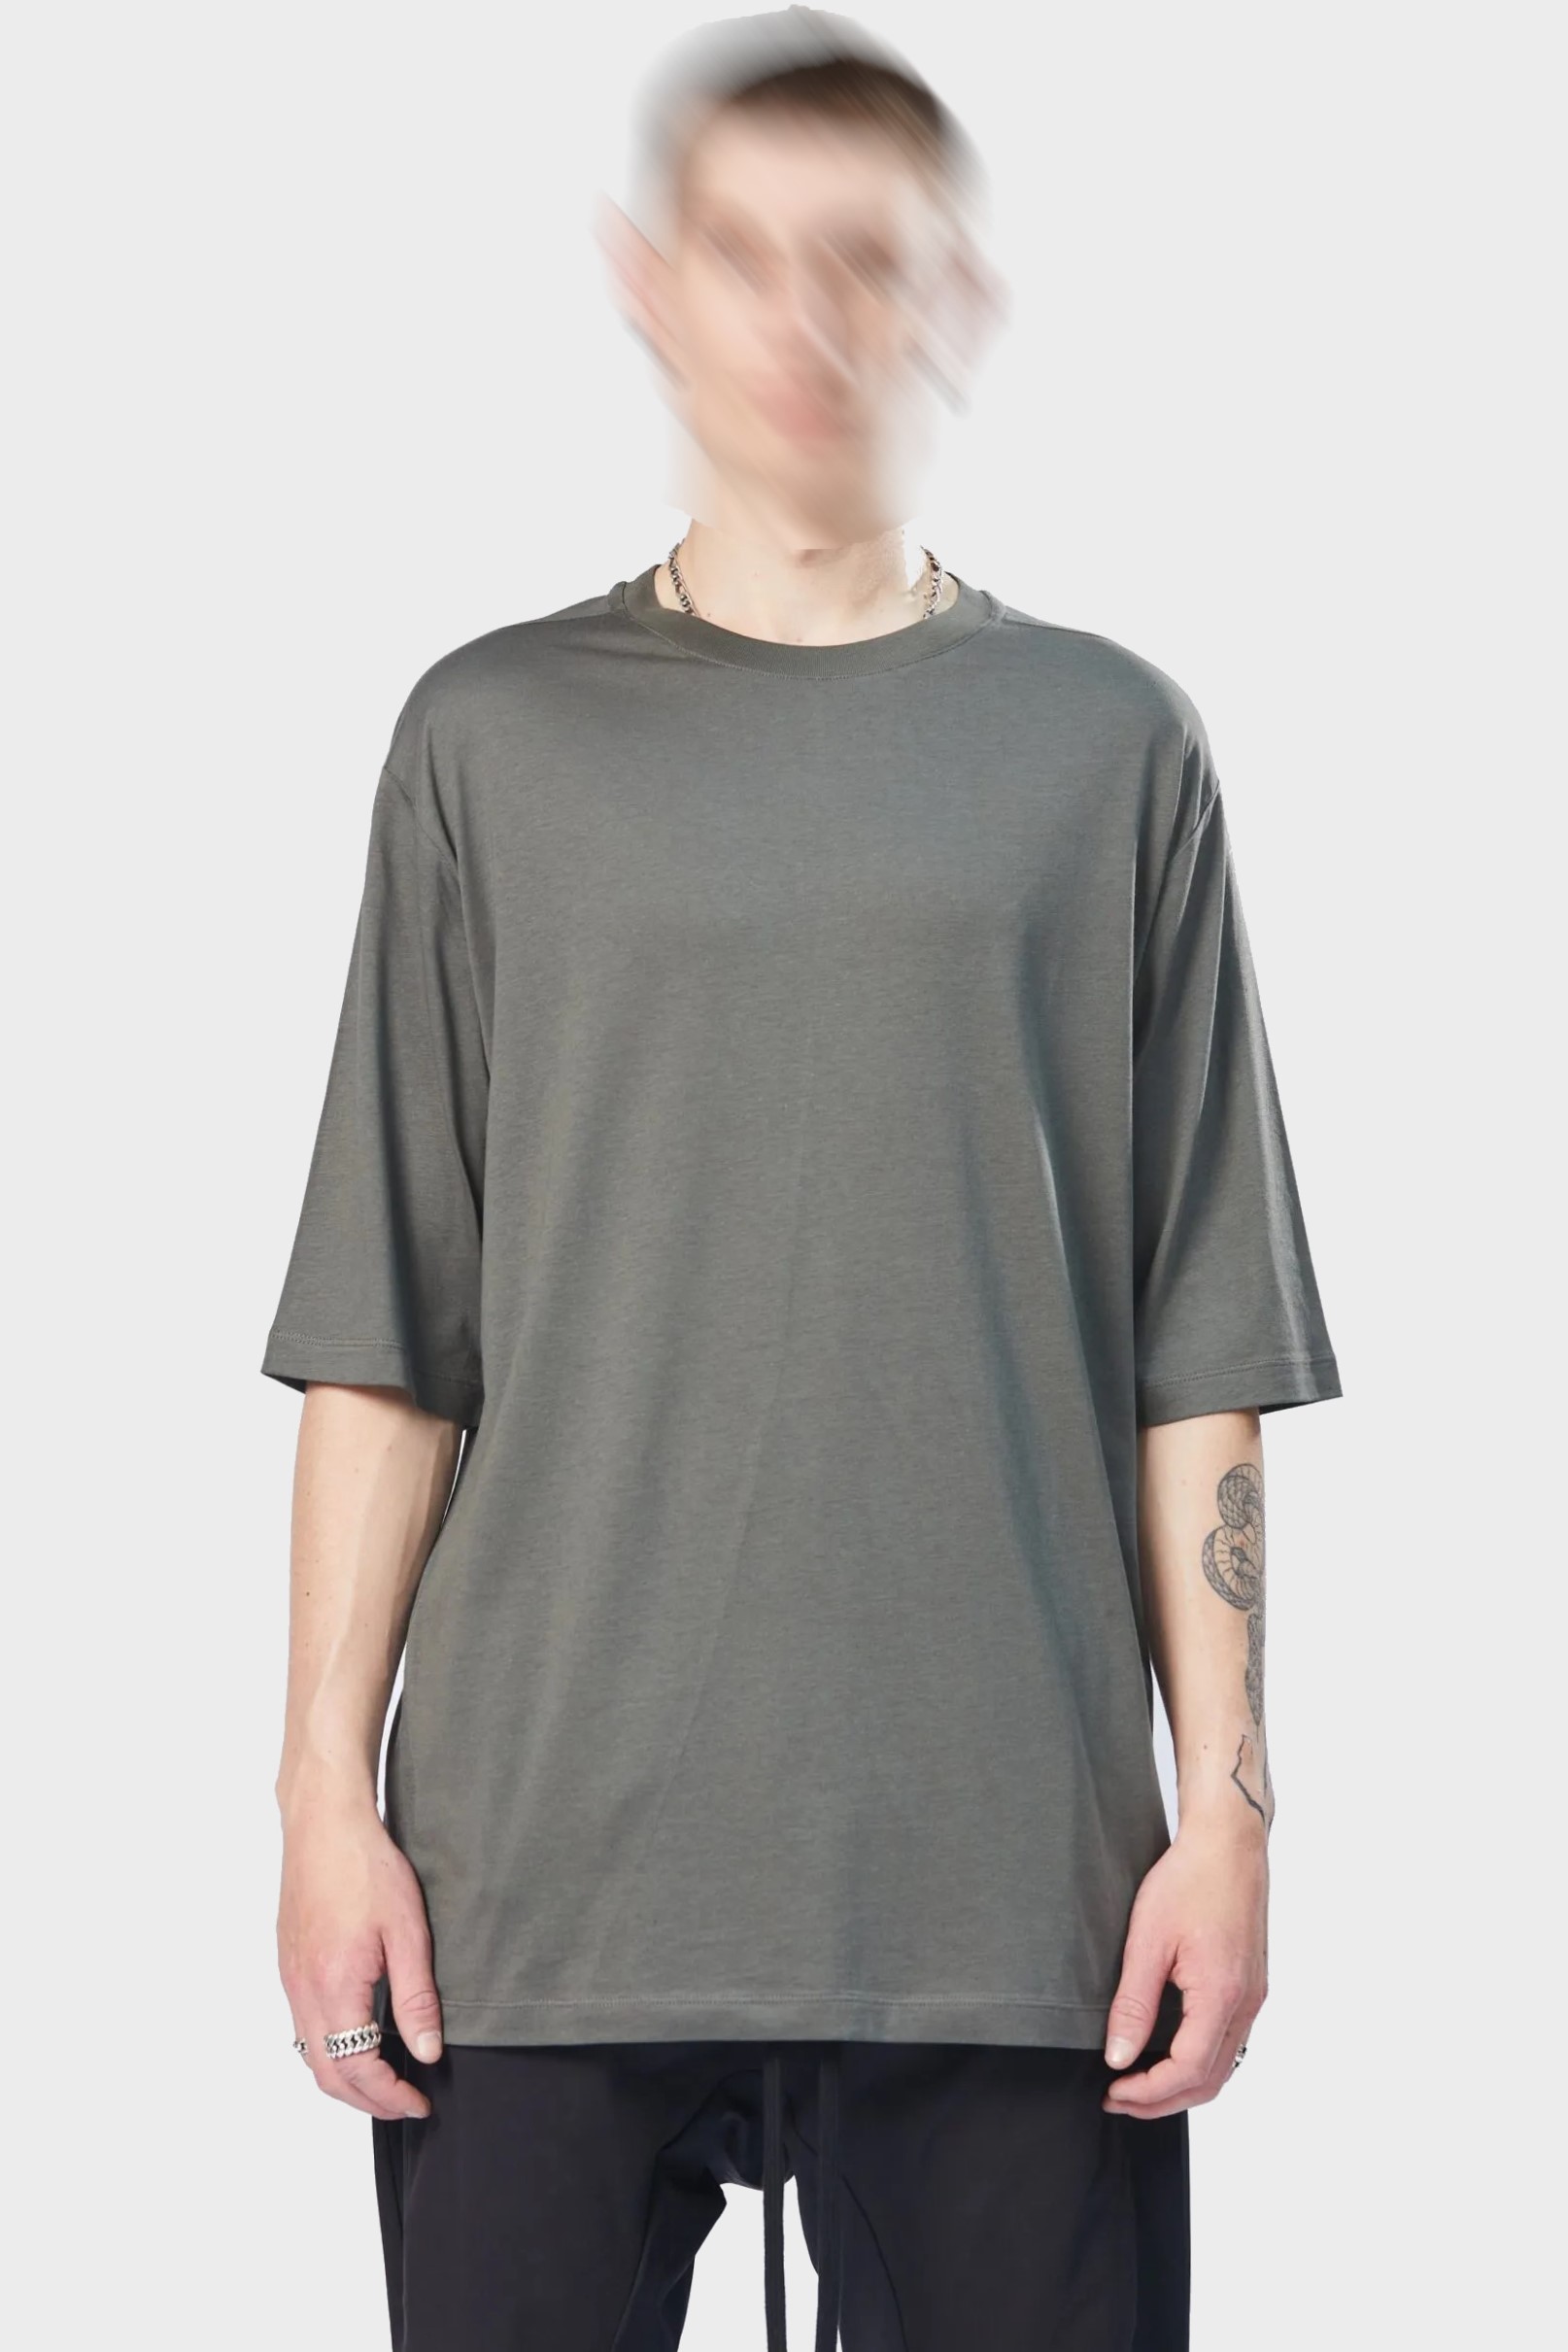 THOM KROM Oversize T-Shirt in Ivy Green